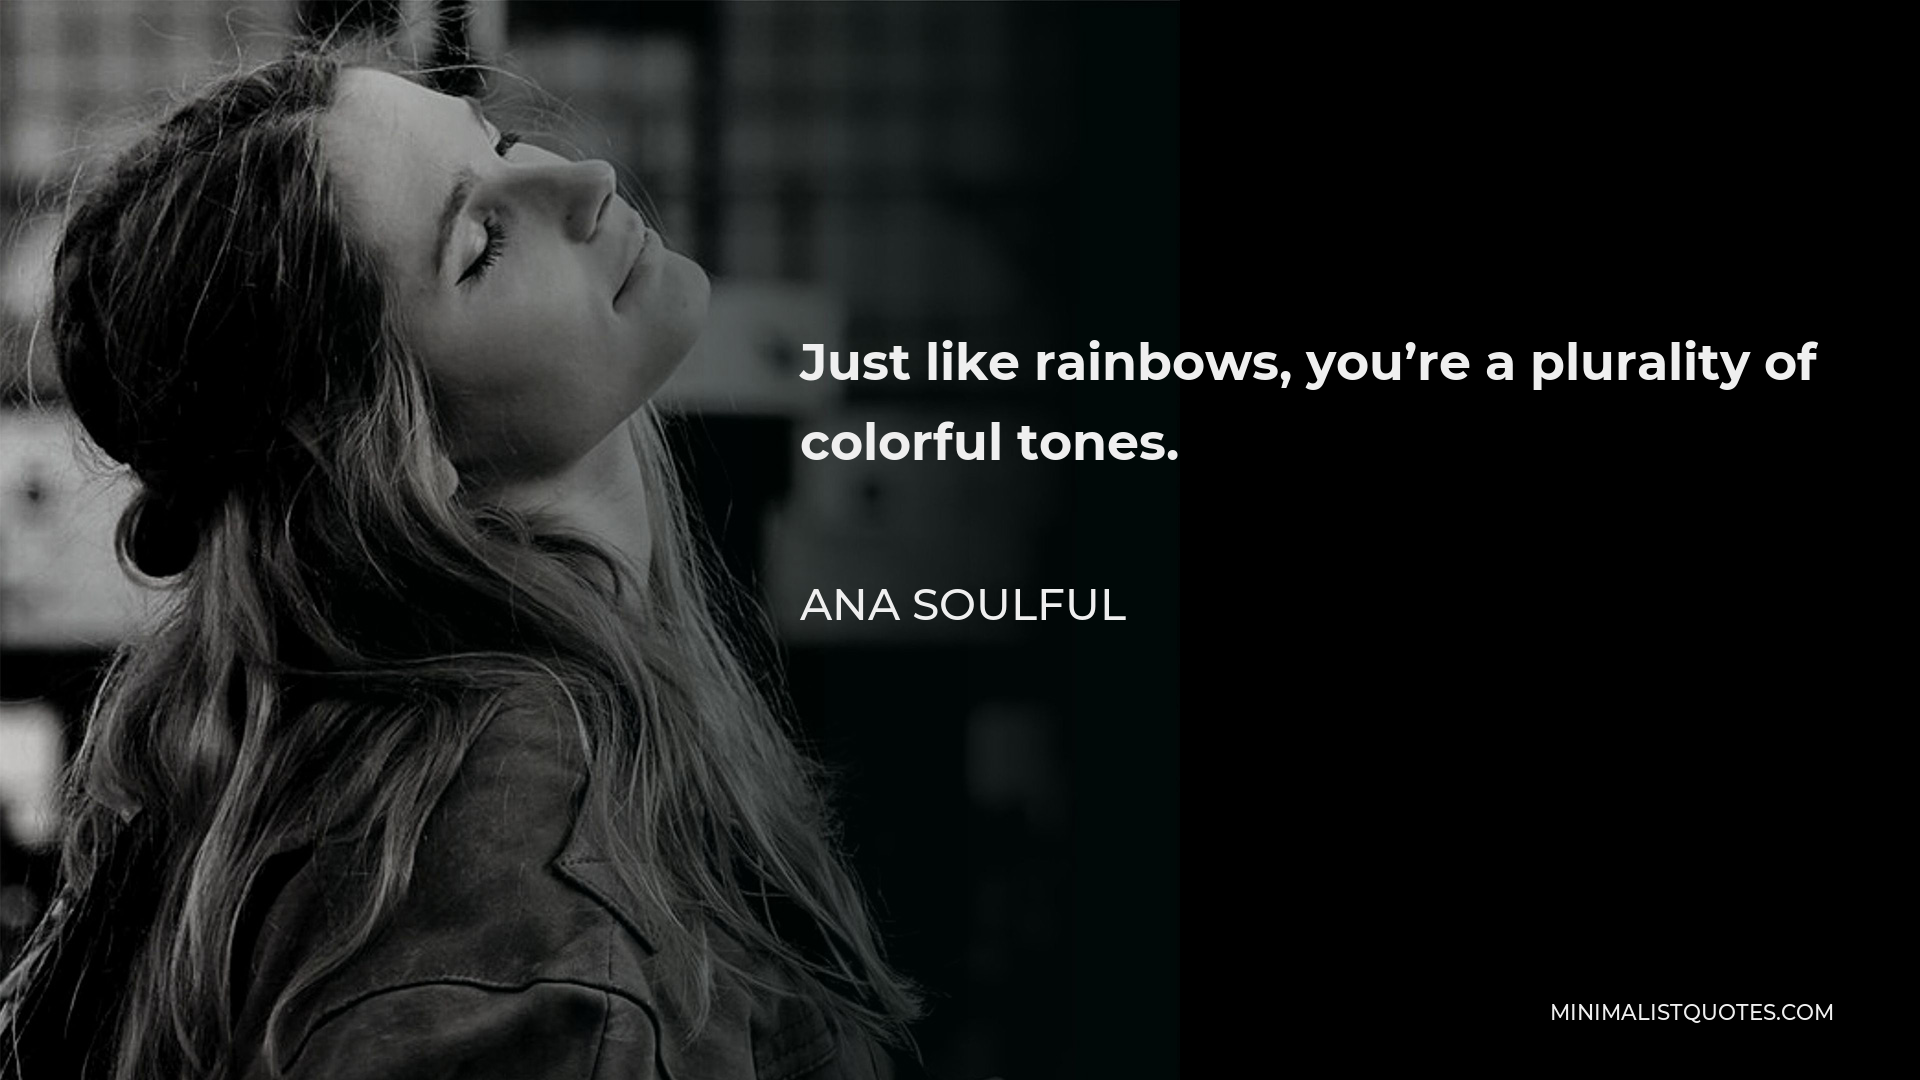 Ana Soulful Quote - Just like rainbows, you’re a plurality of colorful tones.